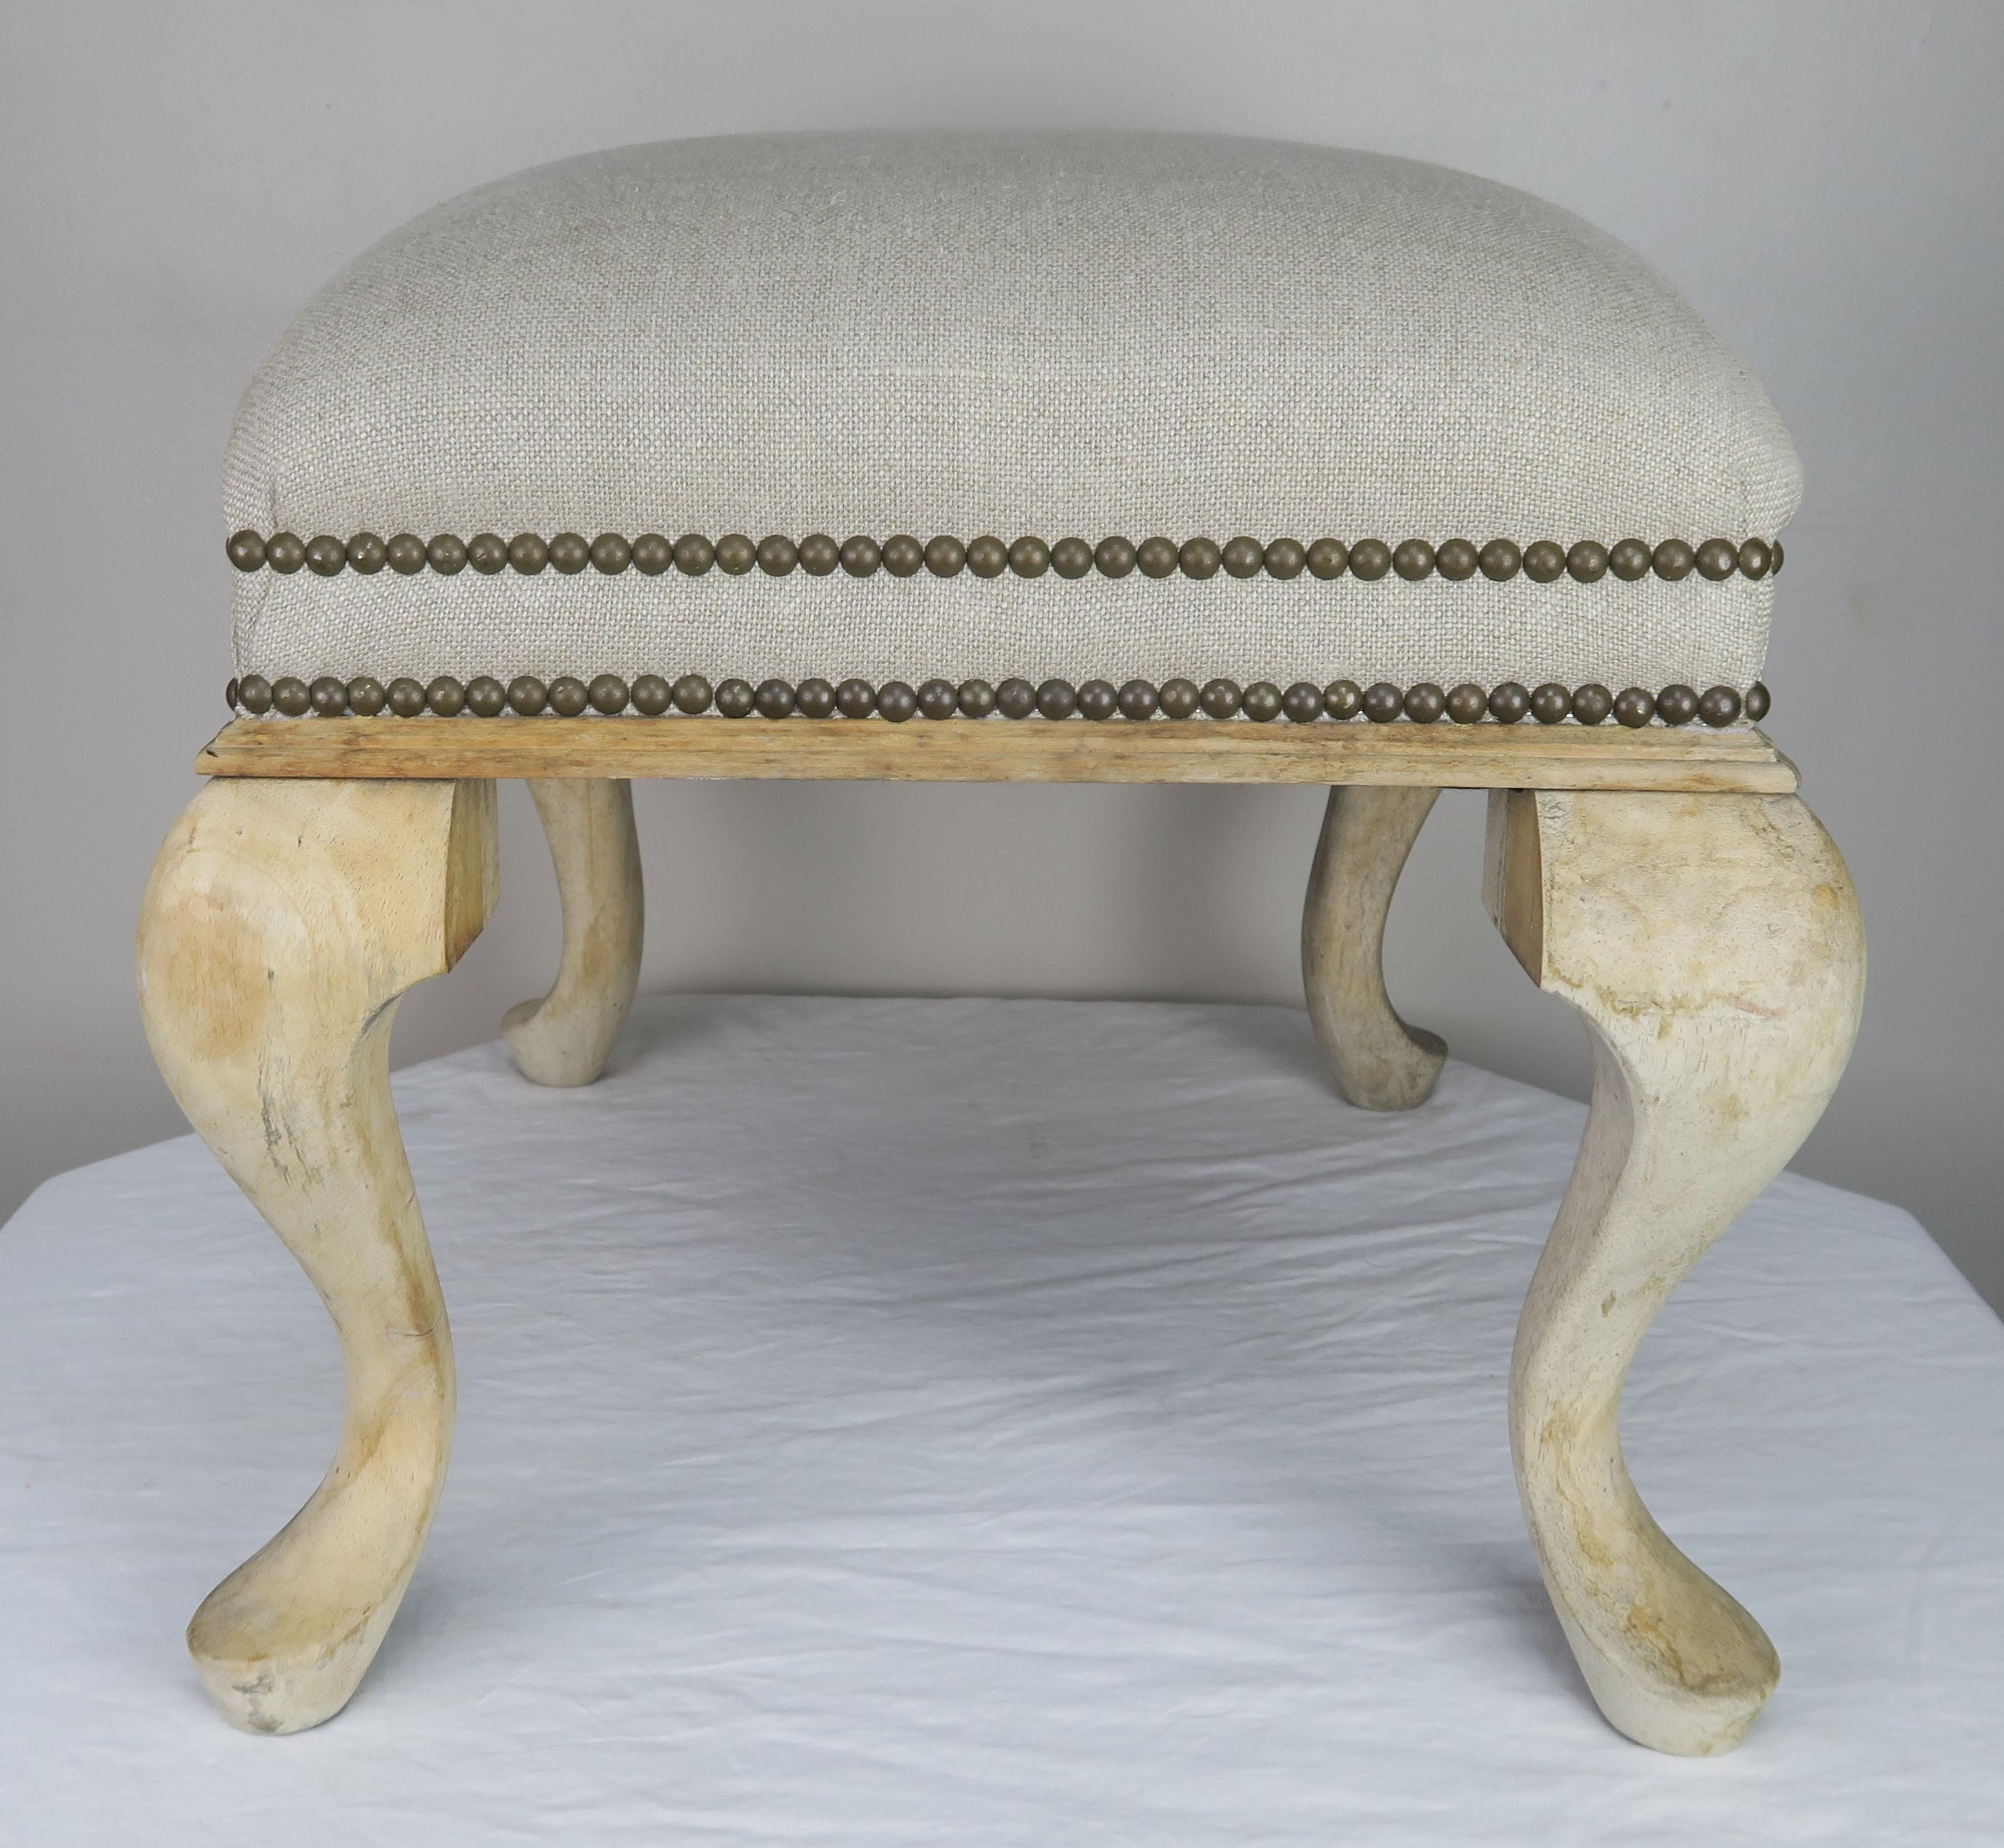 Swedish natural bleached wood bench standing on four legs. The bench is newly upholstered in a washed Belgium linen textiled finished with two rows of antique brass colored nailheads.